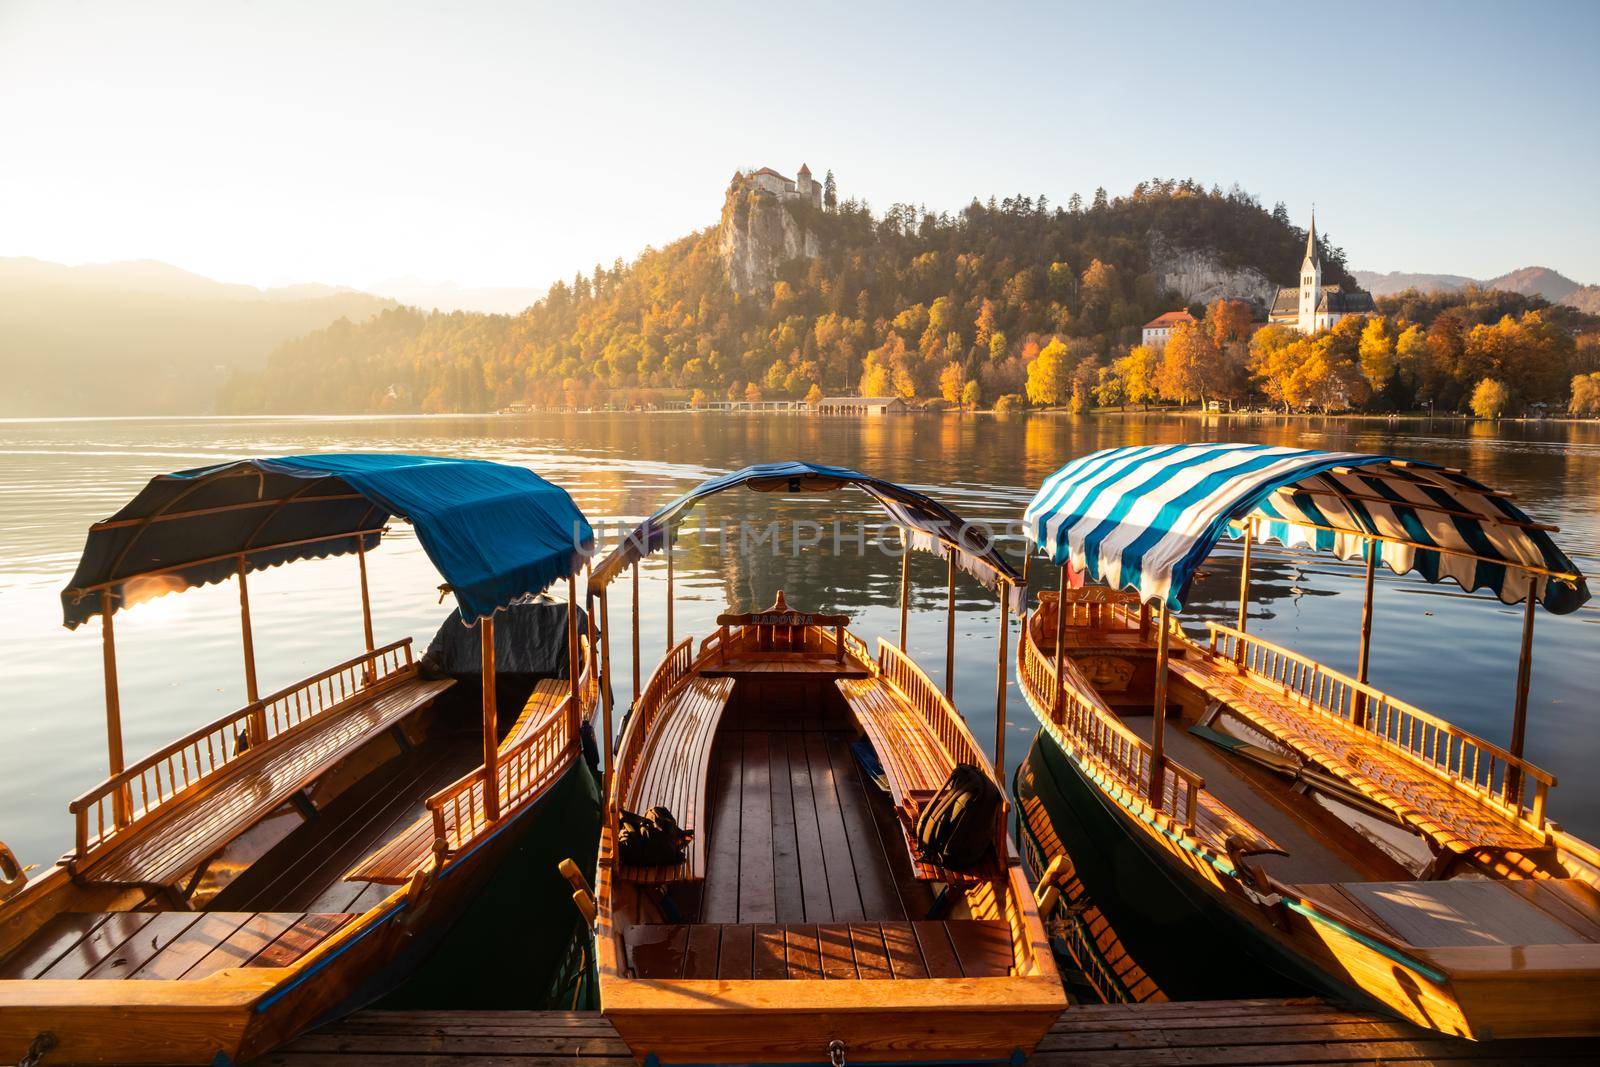 Traditional wooden boats on picture perfect lake Bled, Slovenia.